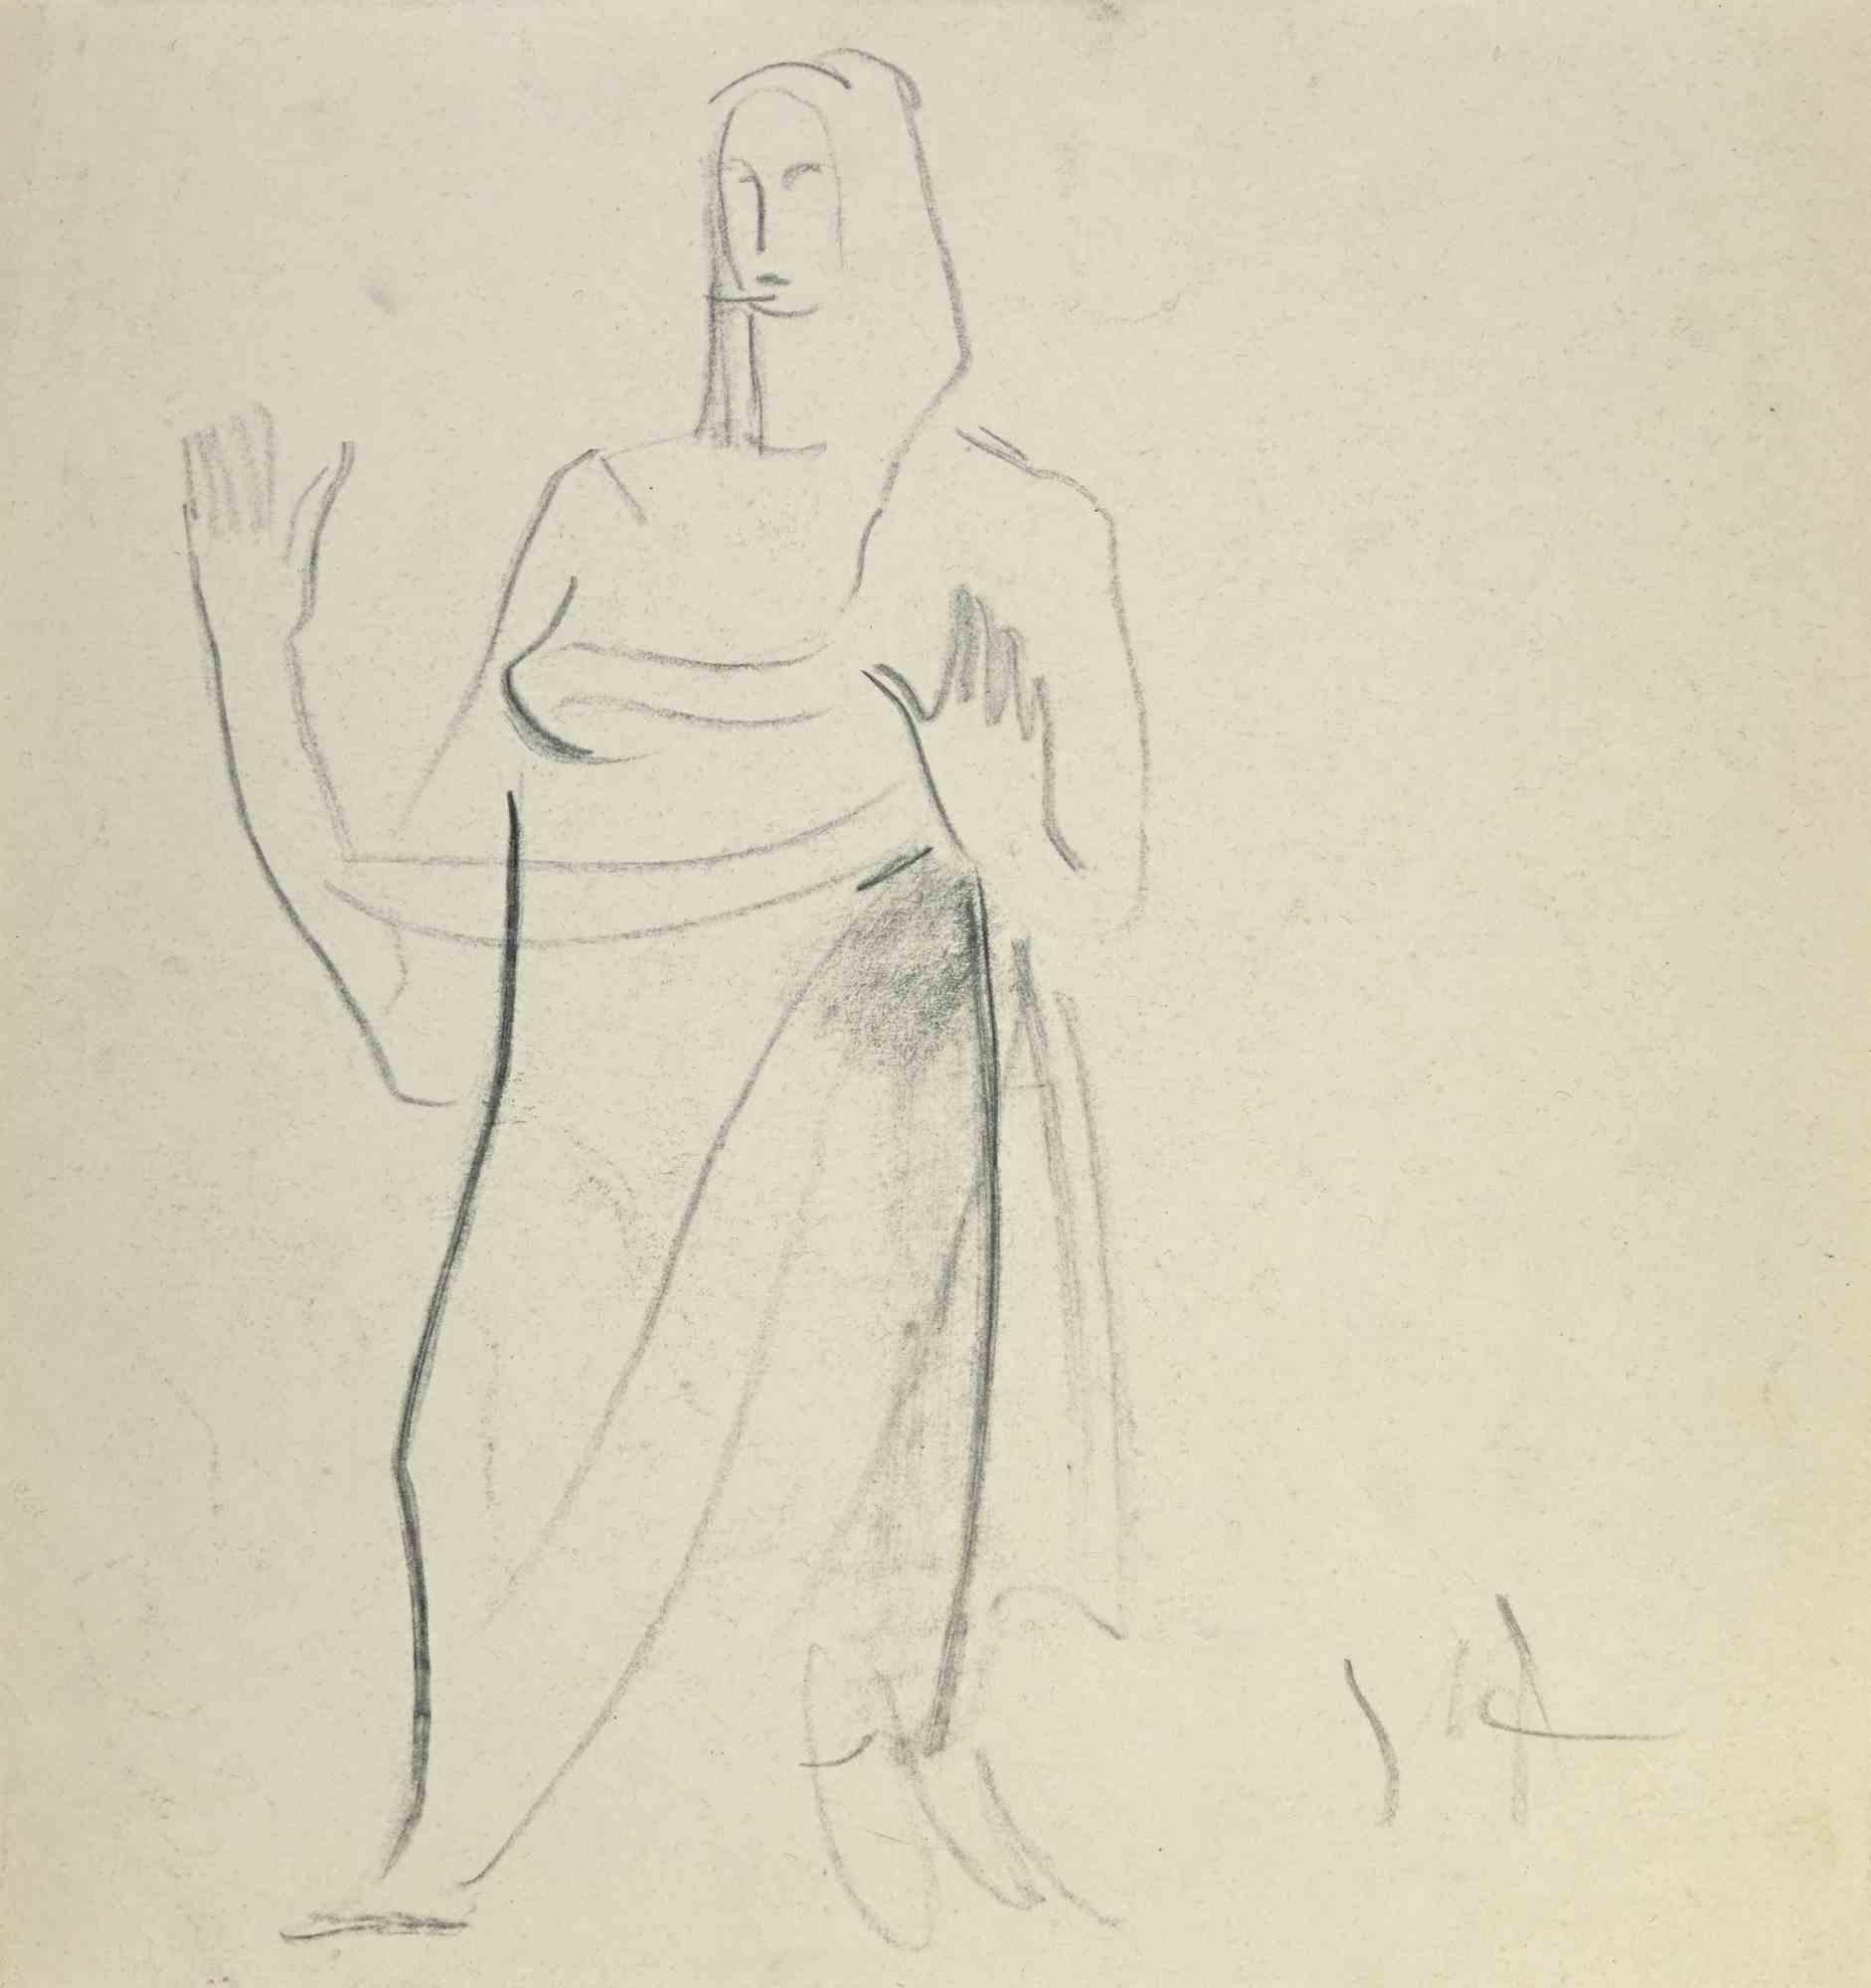 The Woman - Drawing by L. B. Saint-André - Mid 20th Century